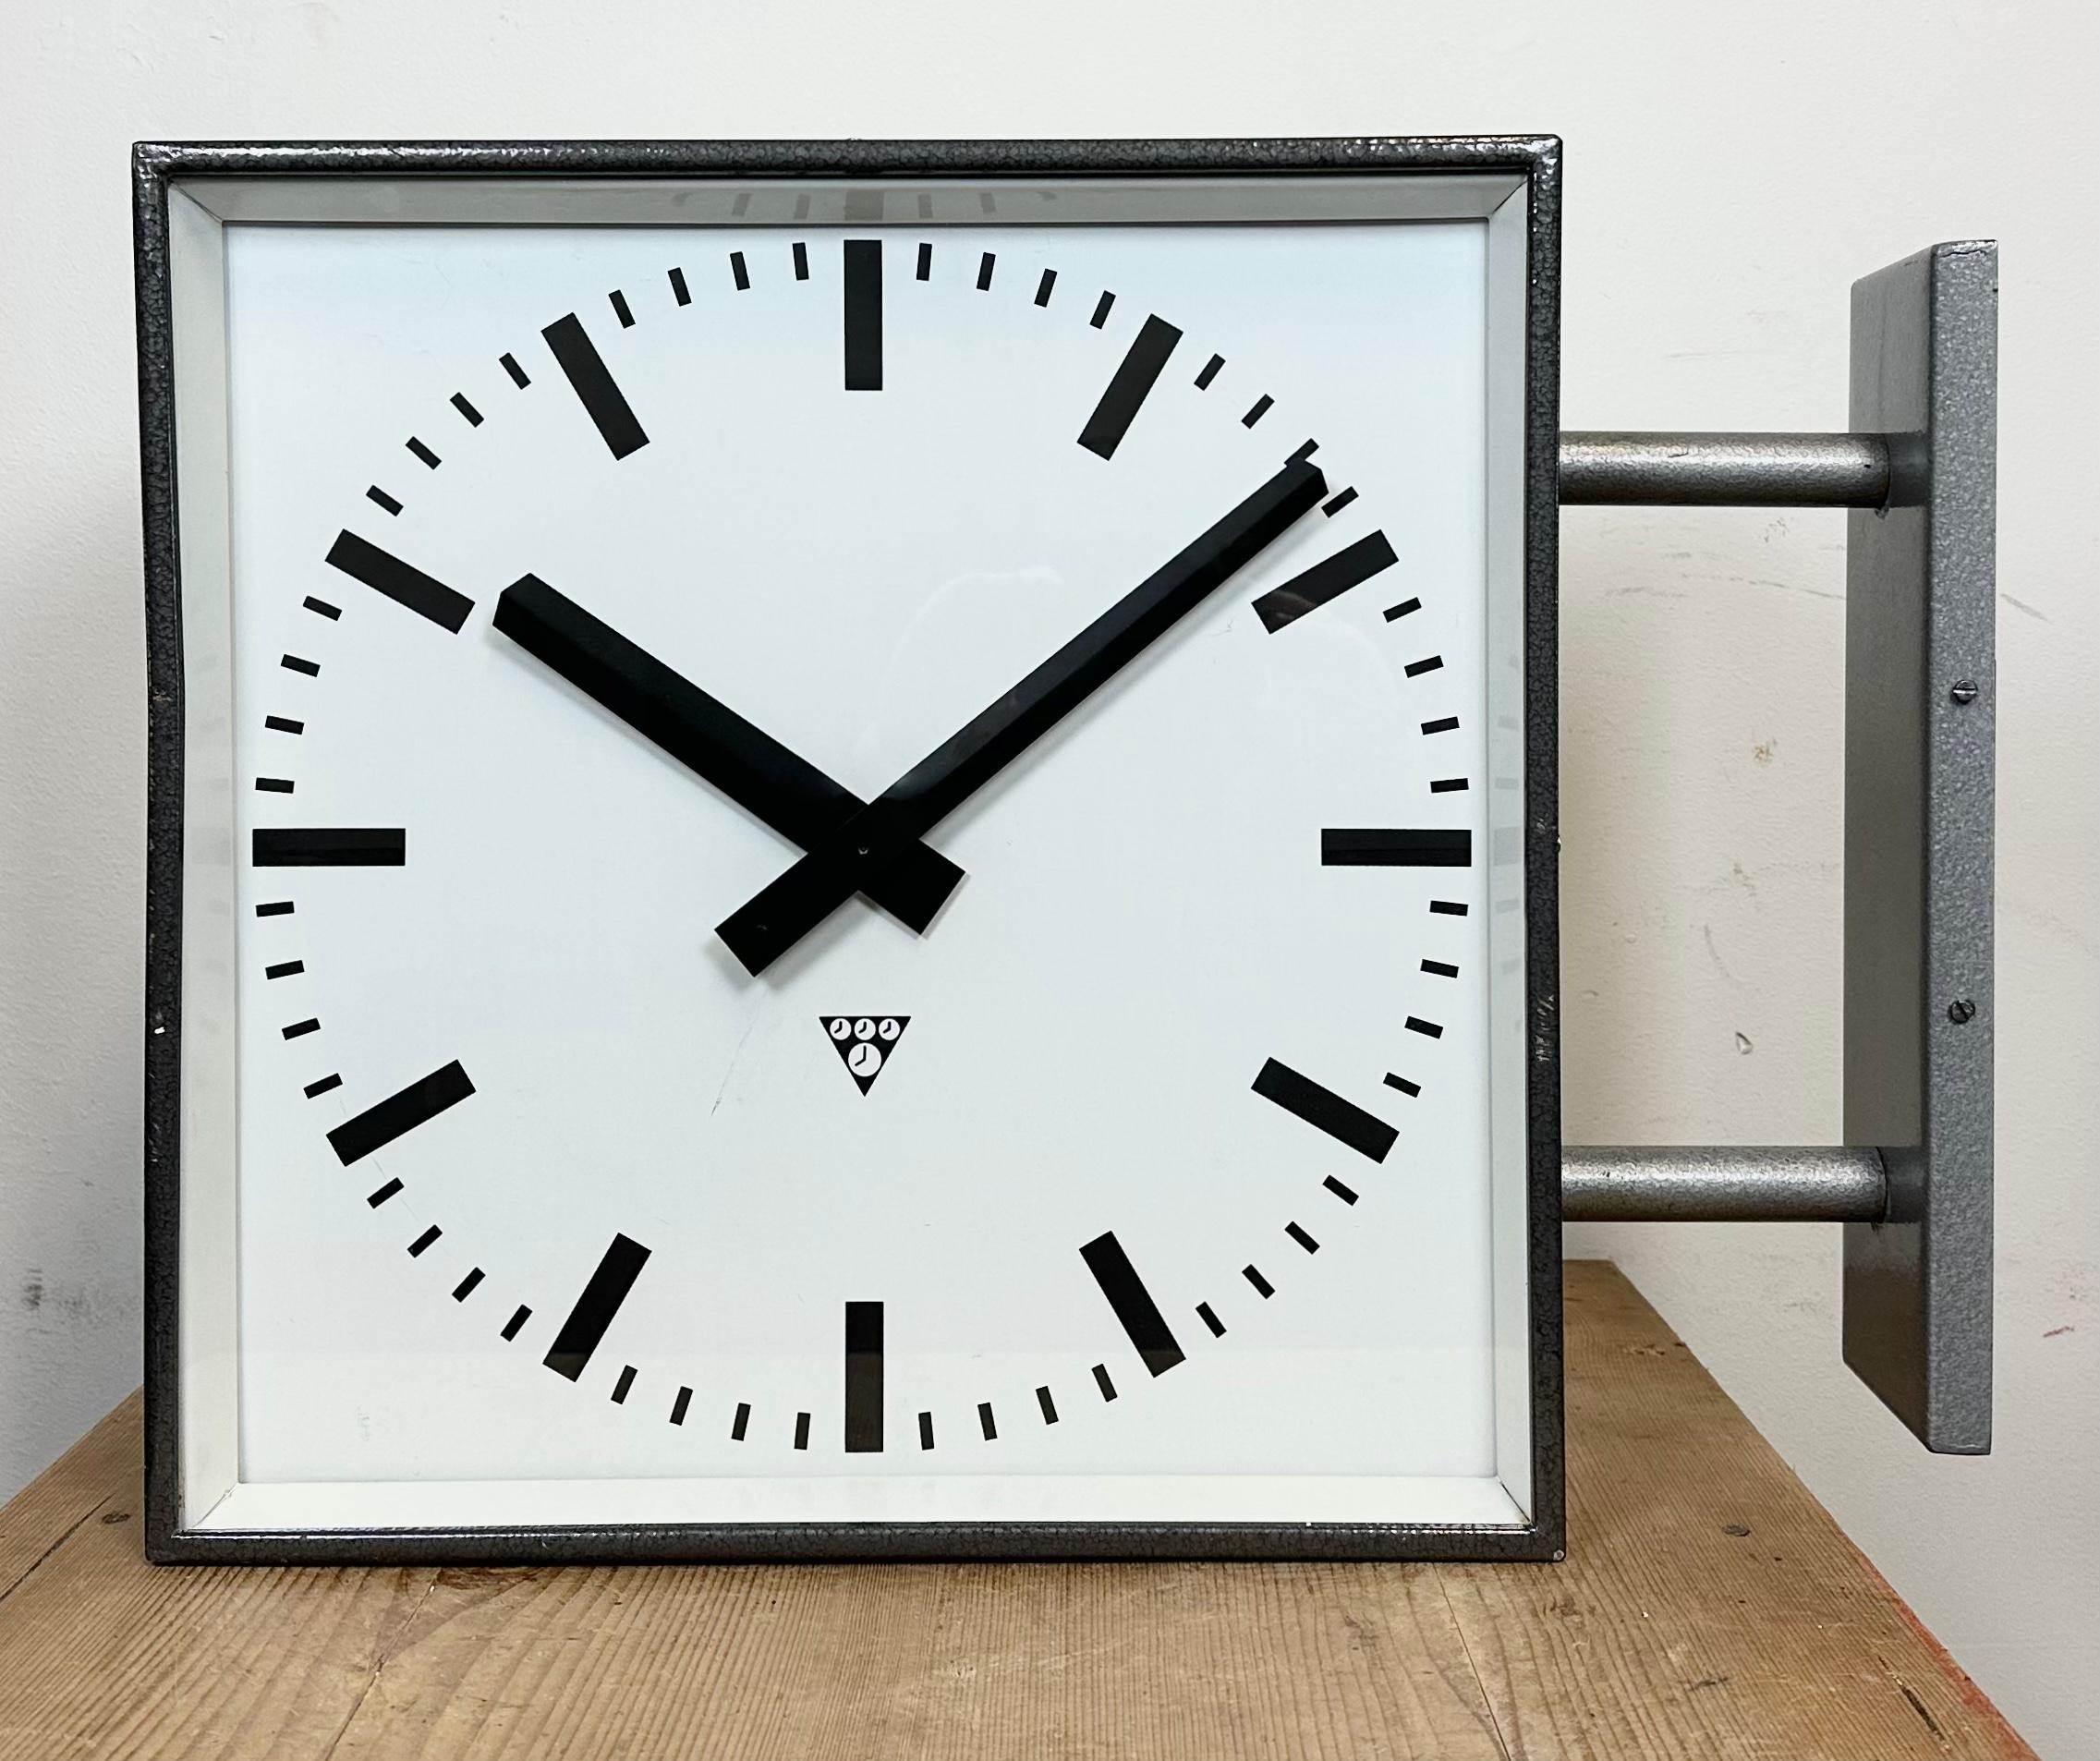 This square double sided railway, school or factory wall clock was produced by Pragotron, in former Czechoslovakia, during the 1970s. The piece features a grey metal body, a dark grey hammer paint clock frames, a clear glass covers, and an aluminum